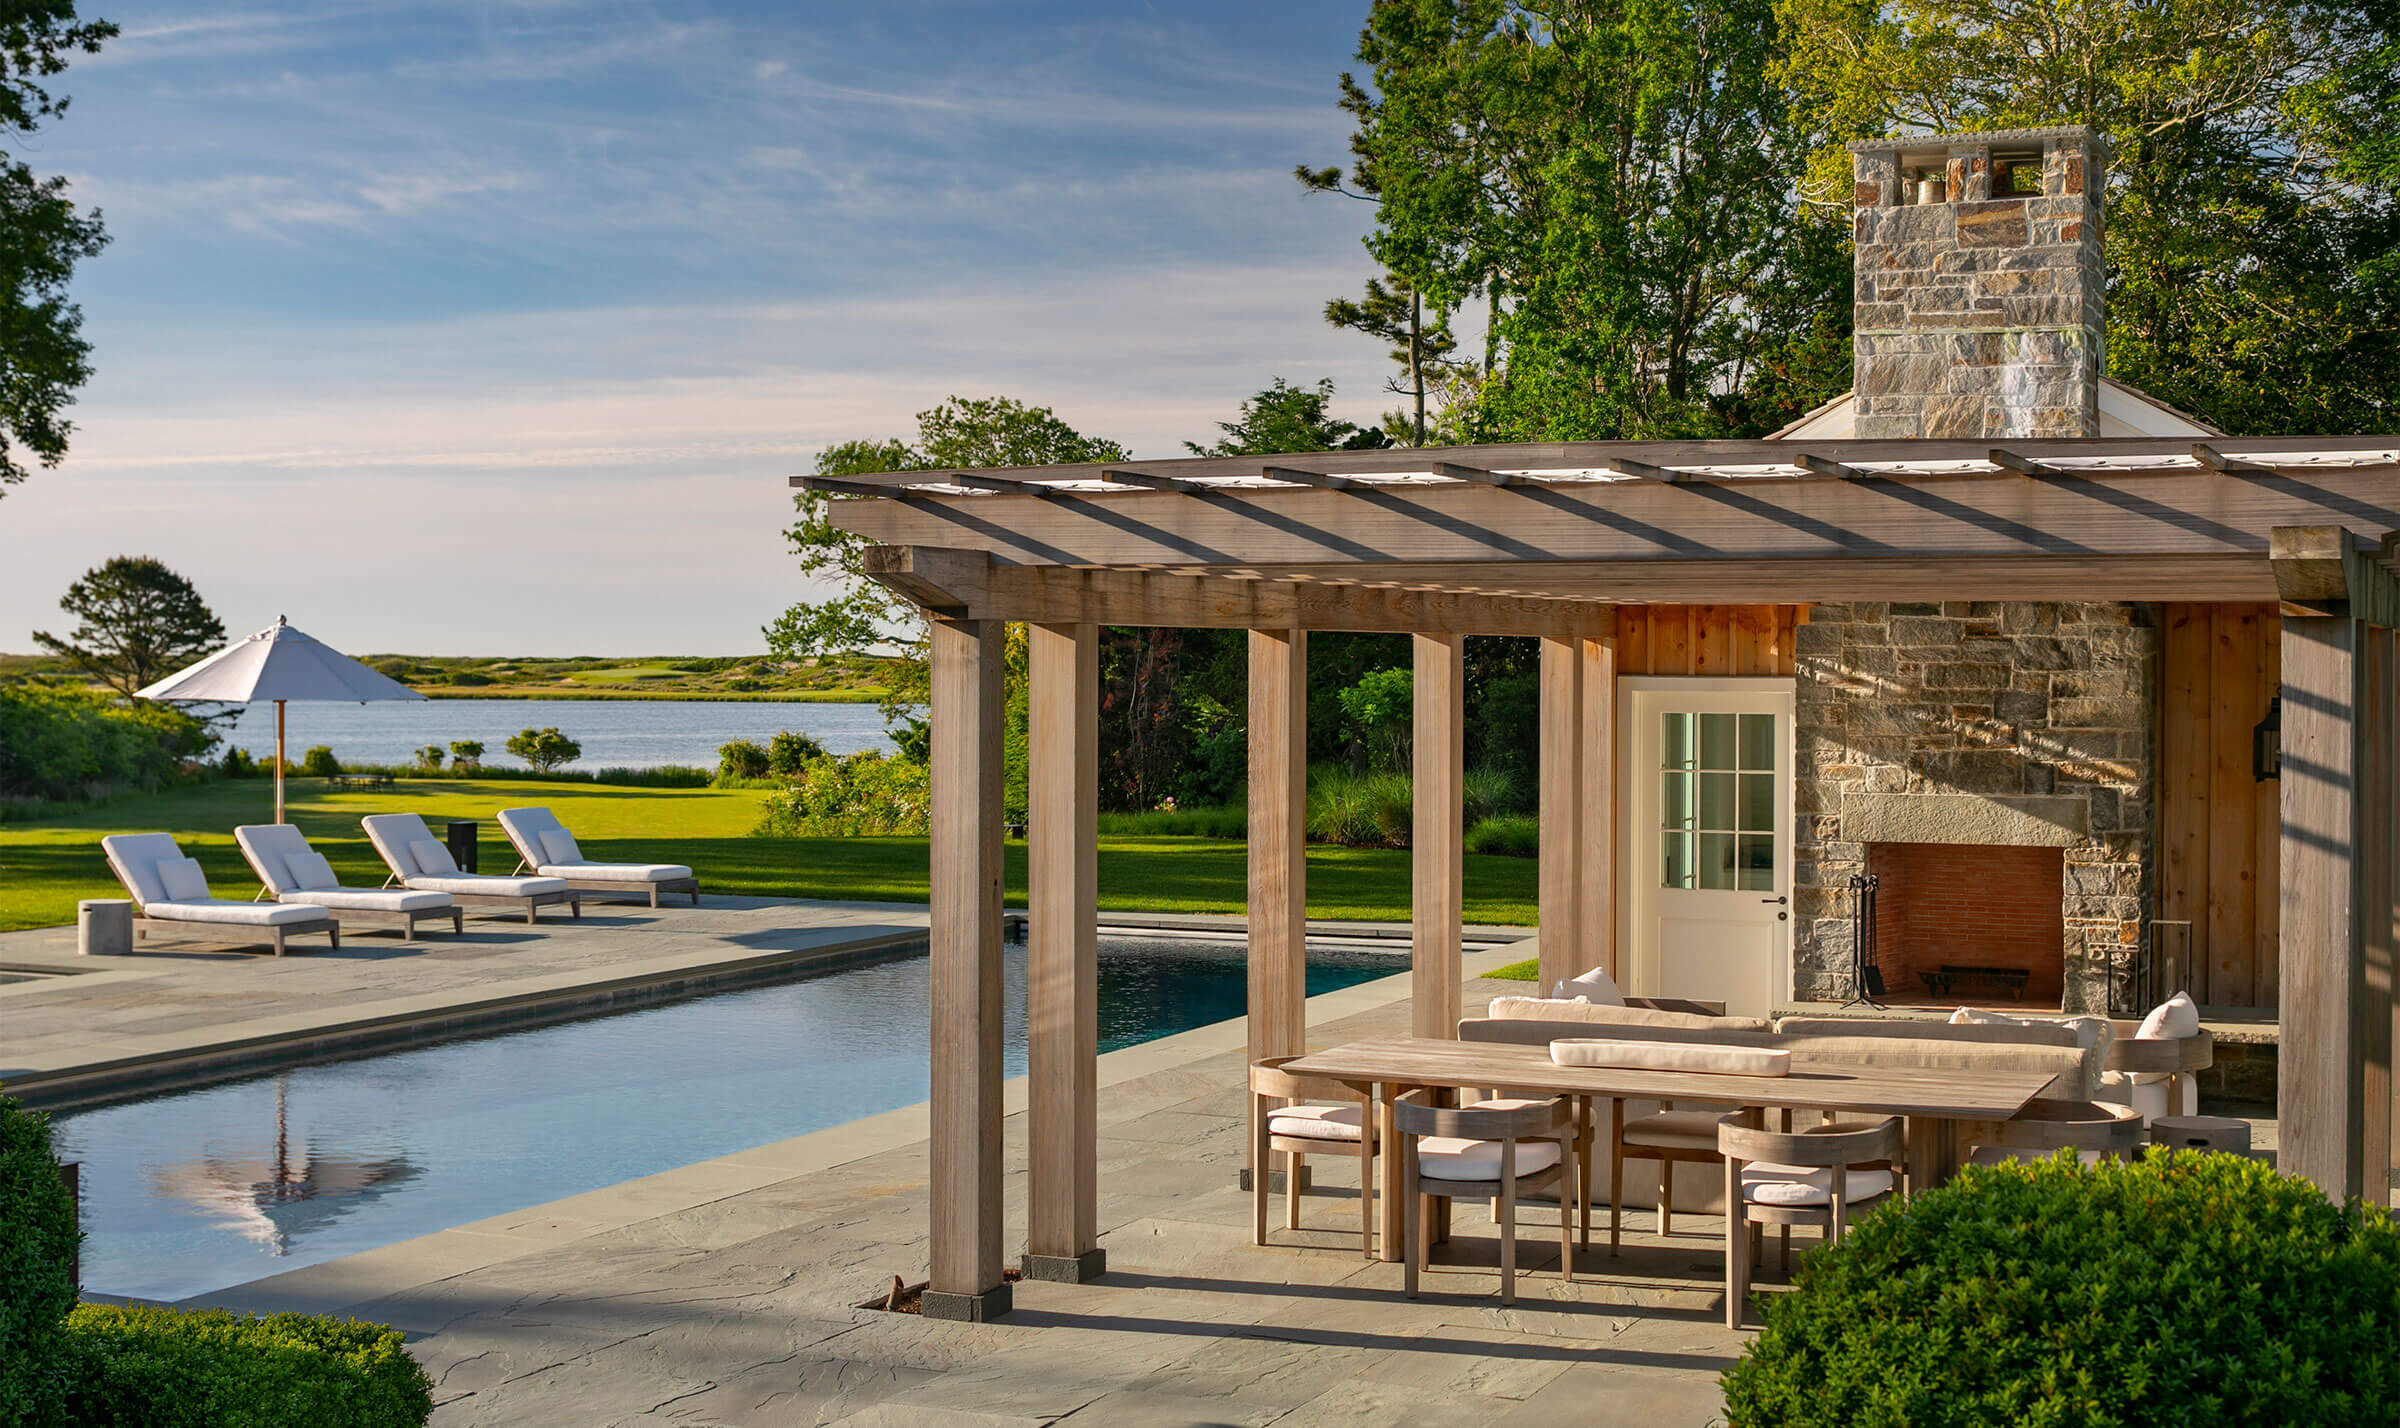 A pool house at a home on Hook Pond in East Hampton. COURTESY BUILDING DETAILS